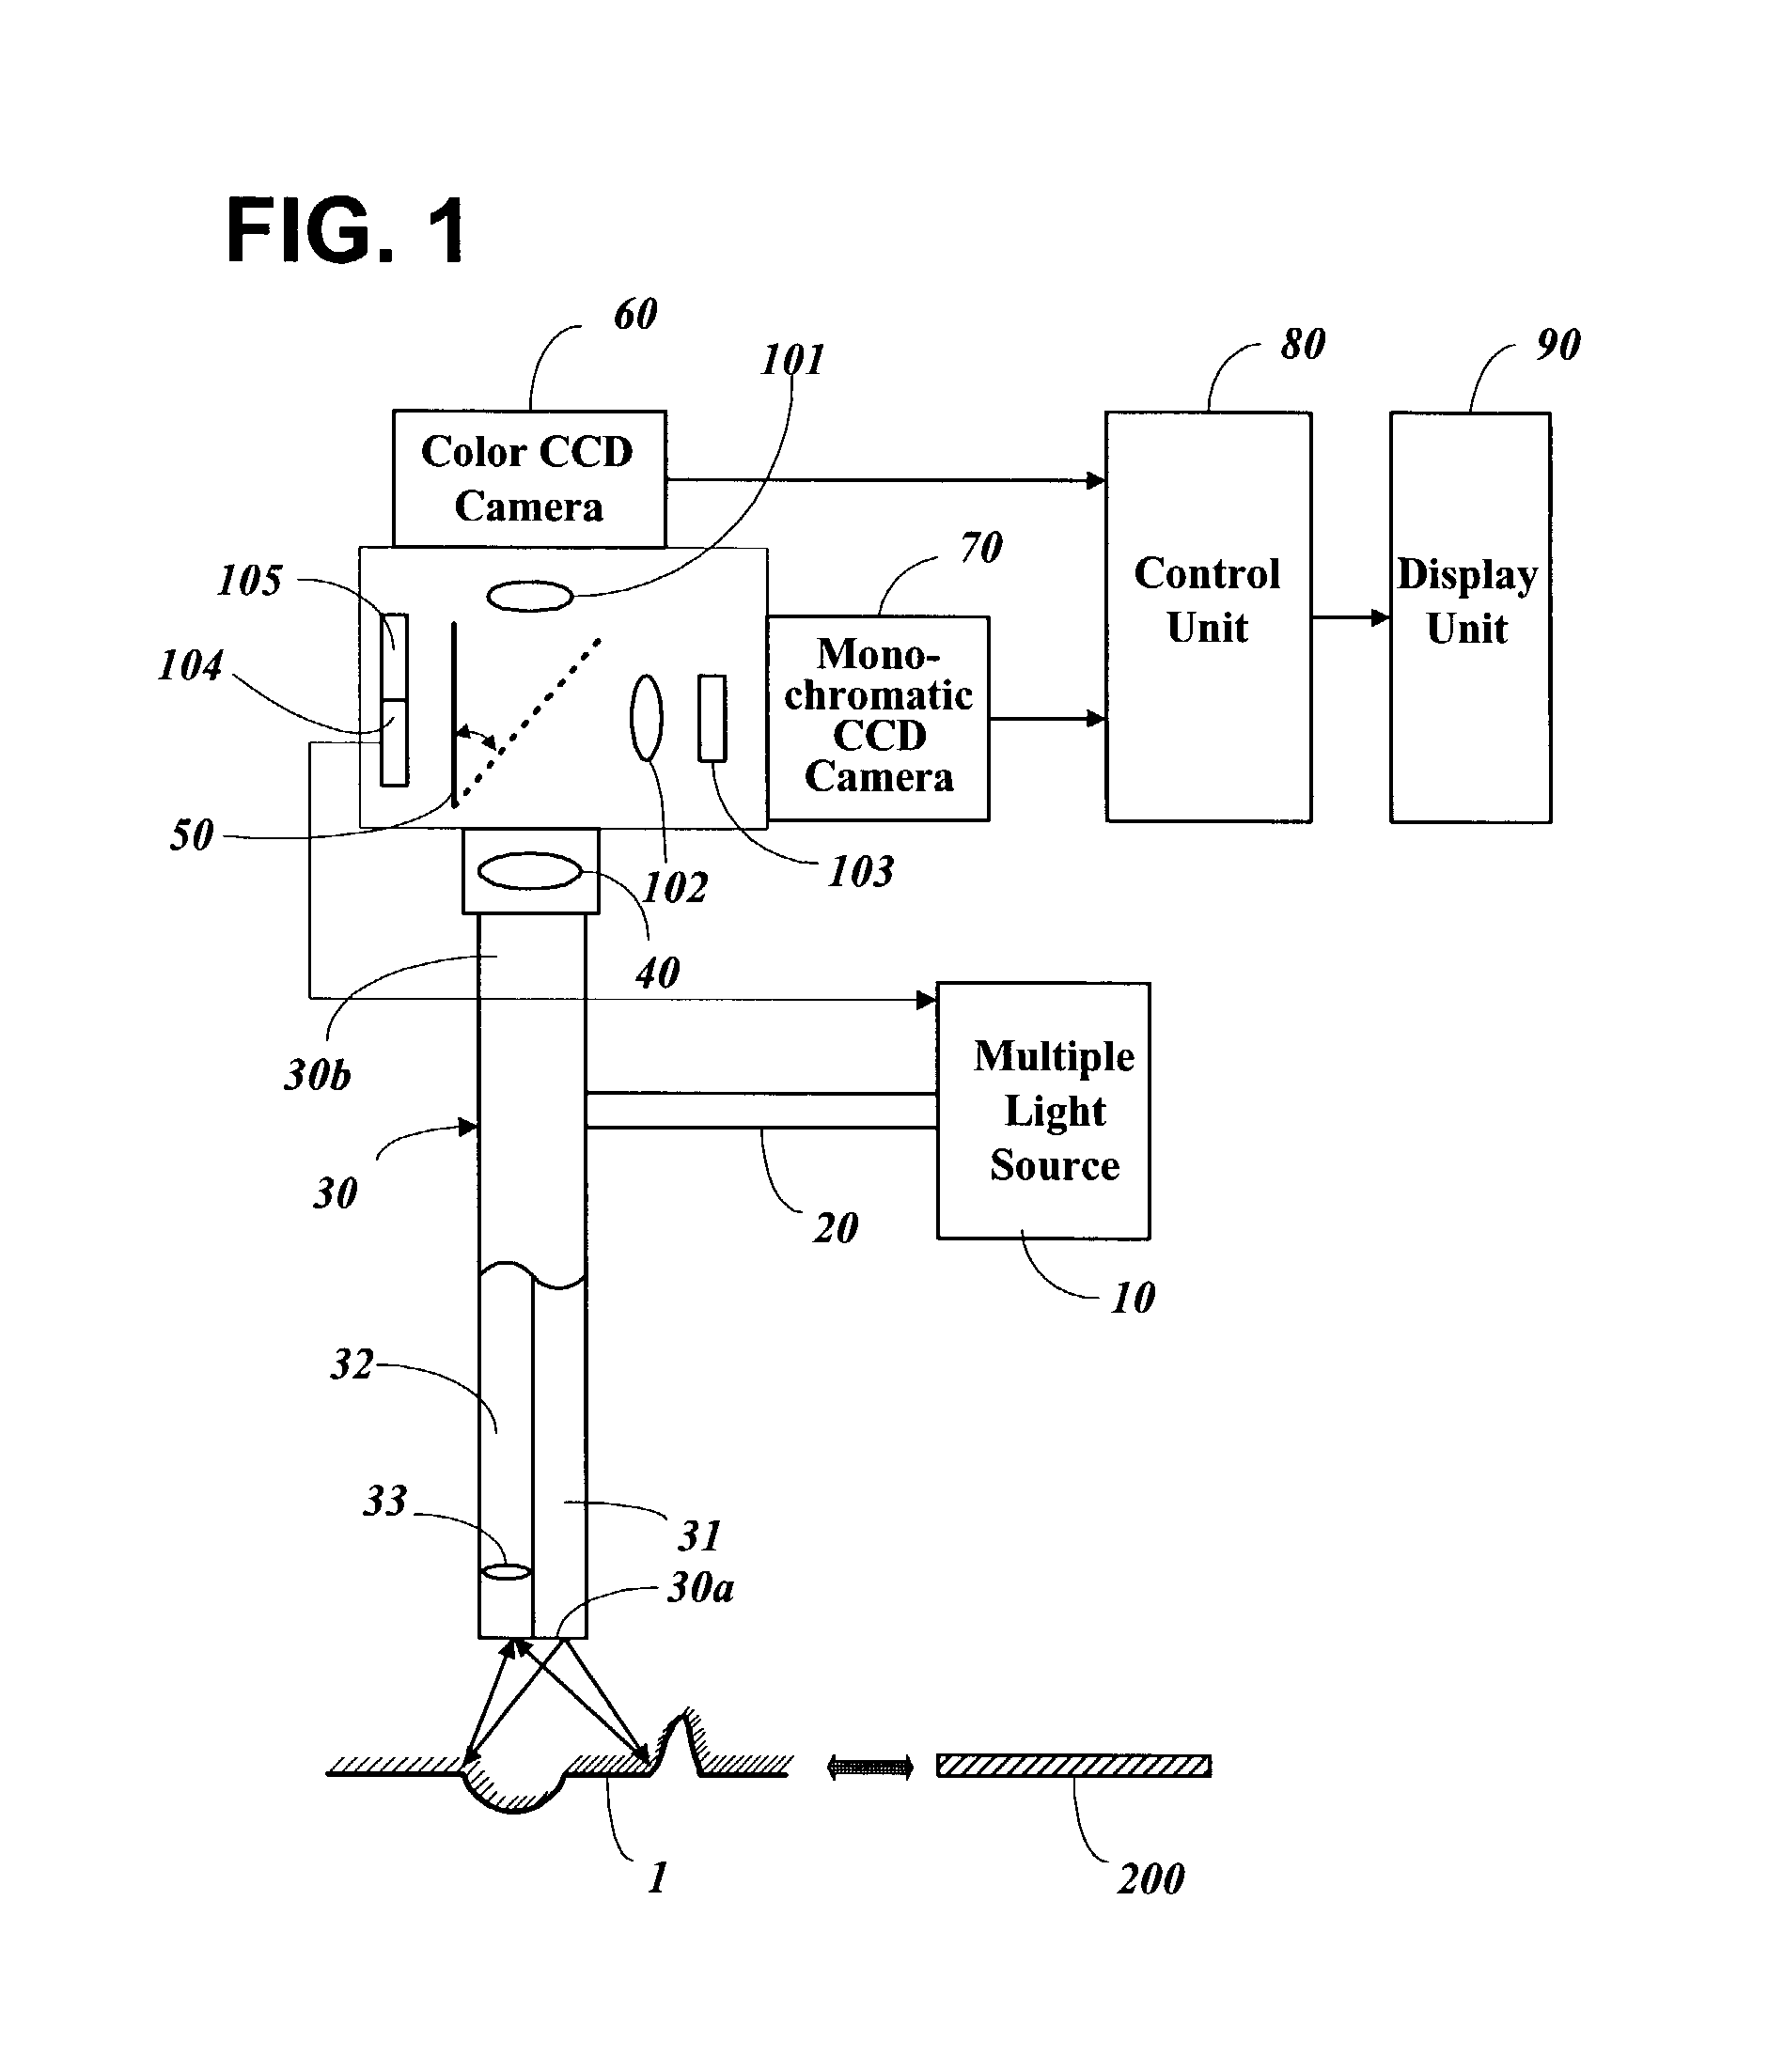 Fluorescence endoscope apparatus and method for imaging tissue within a body using the same